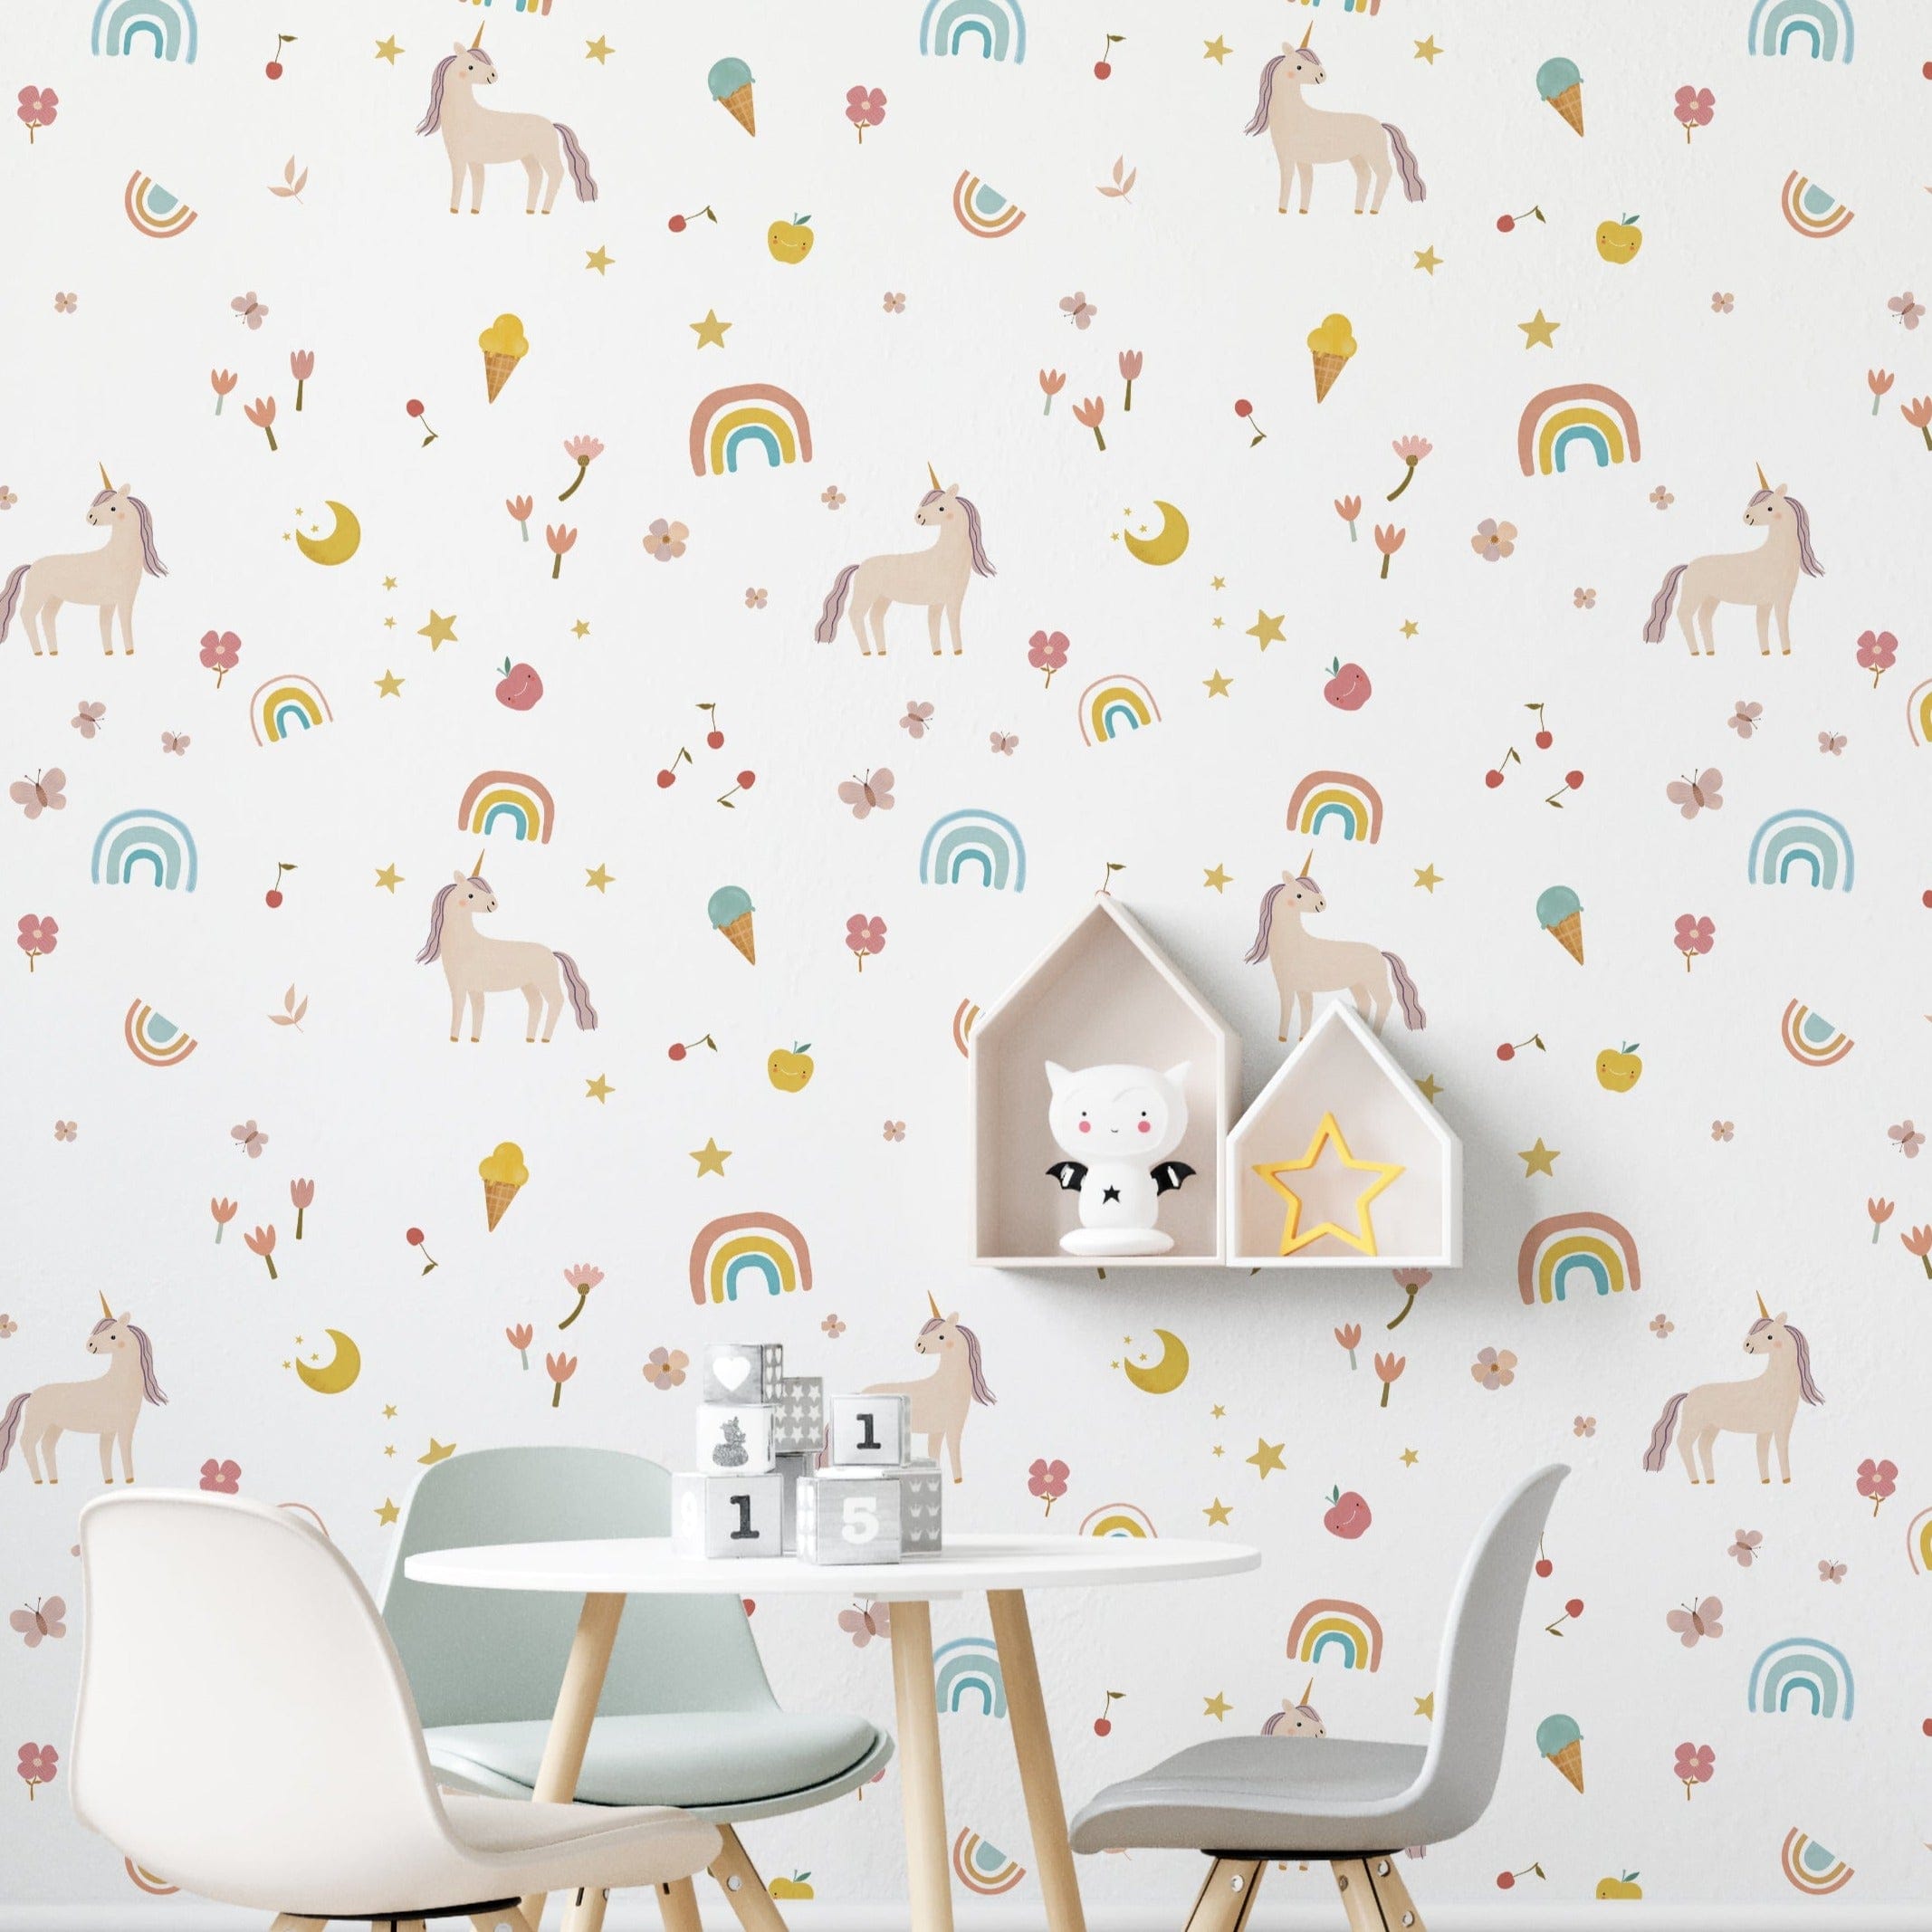 Children's play area with Unicorn Adventure Wallpaper, displaying a delightful pattern of pastel-colored unicorns, rainbows, and other whimsical elements, complemented by a white table and chairs with cute decor.